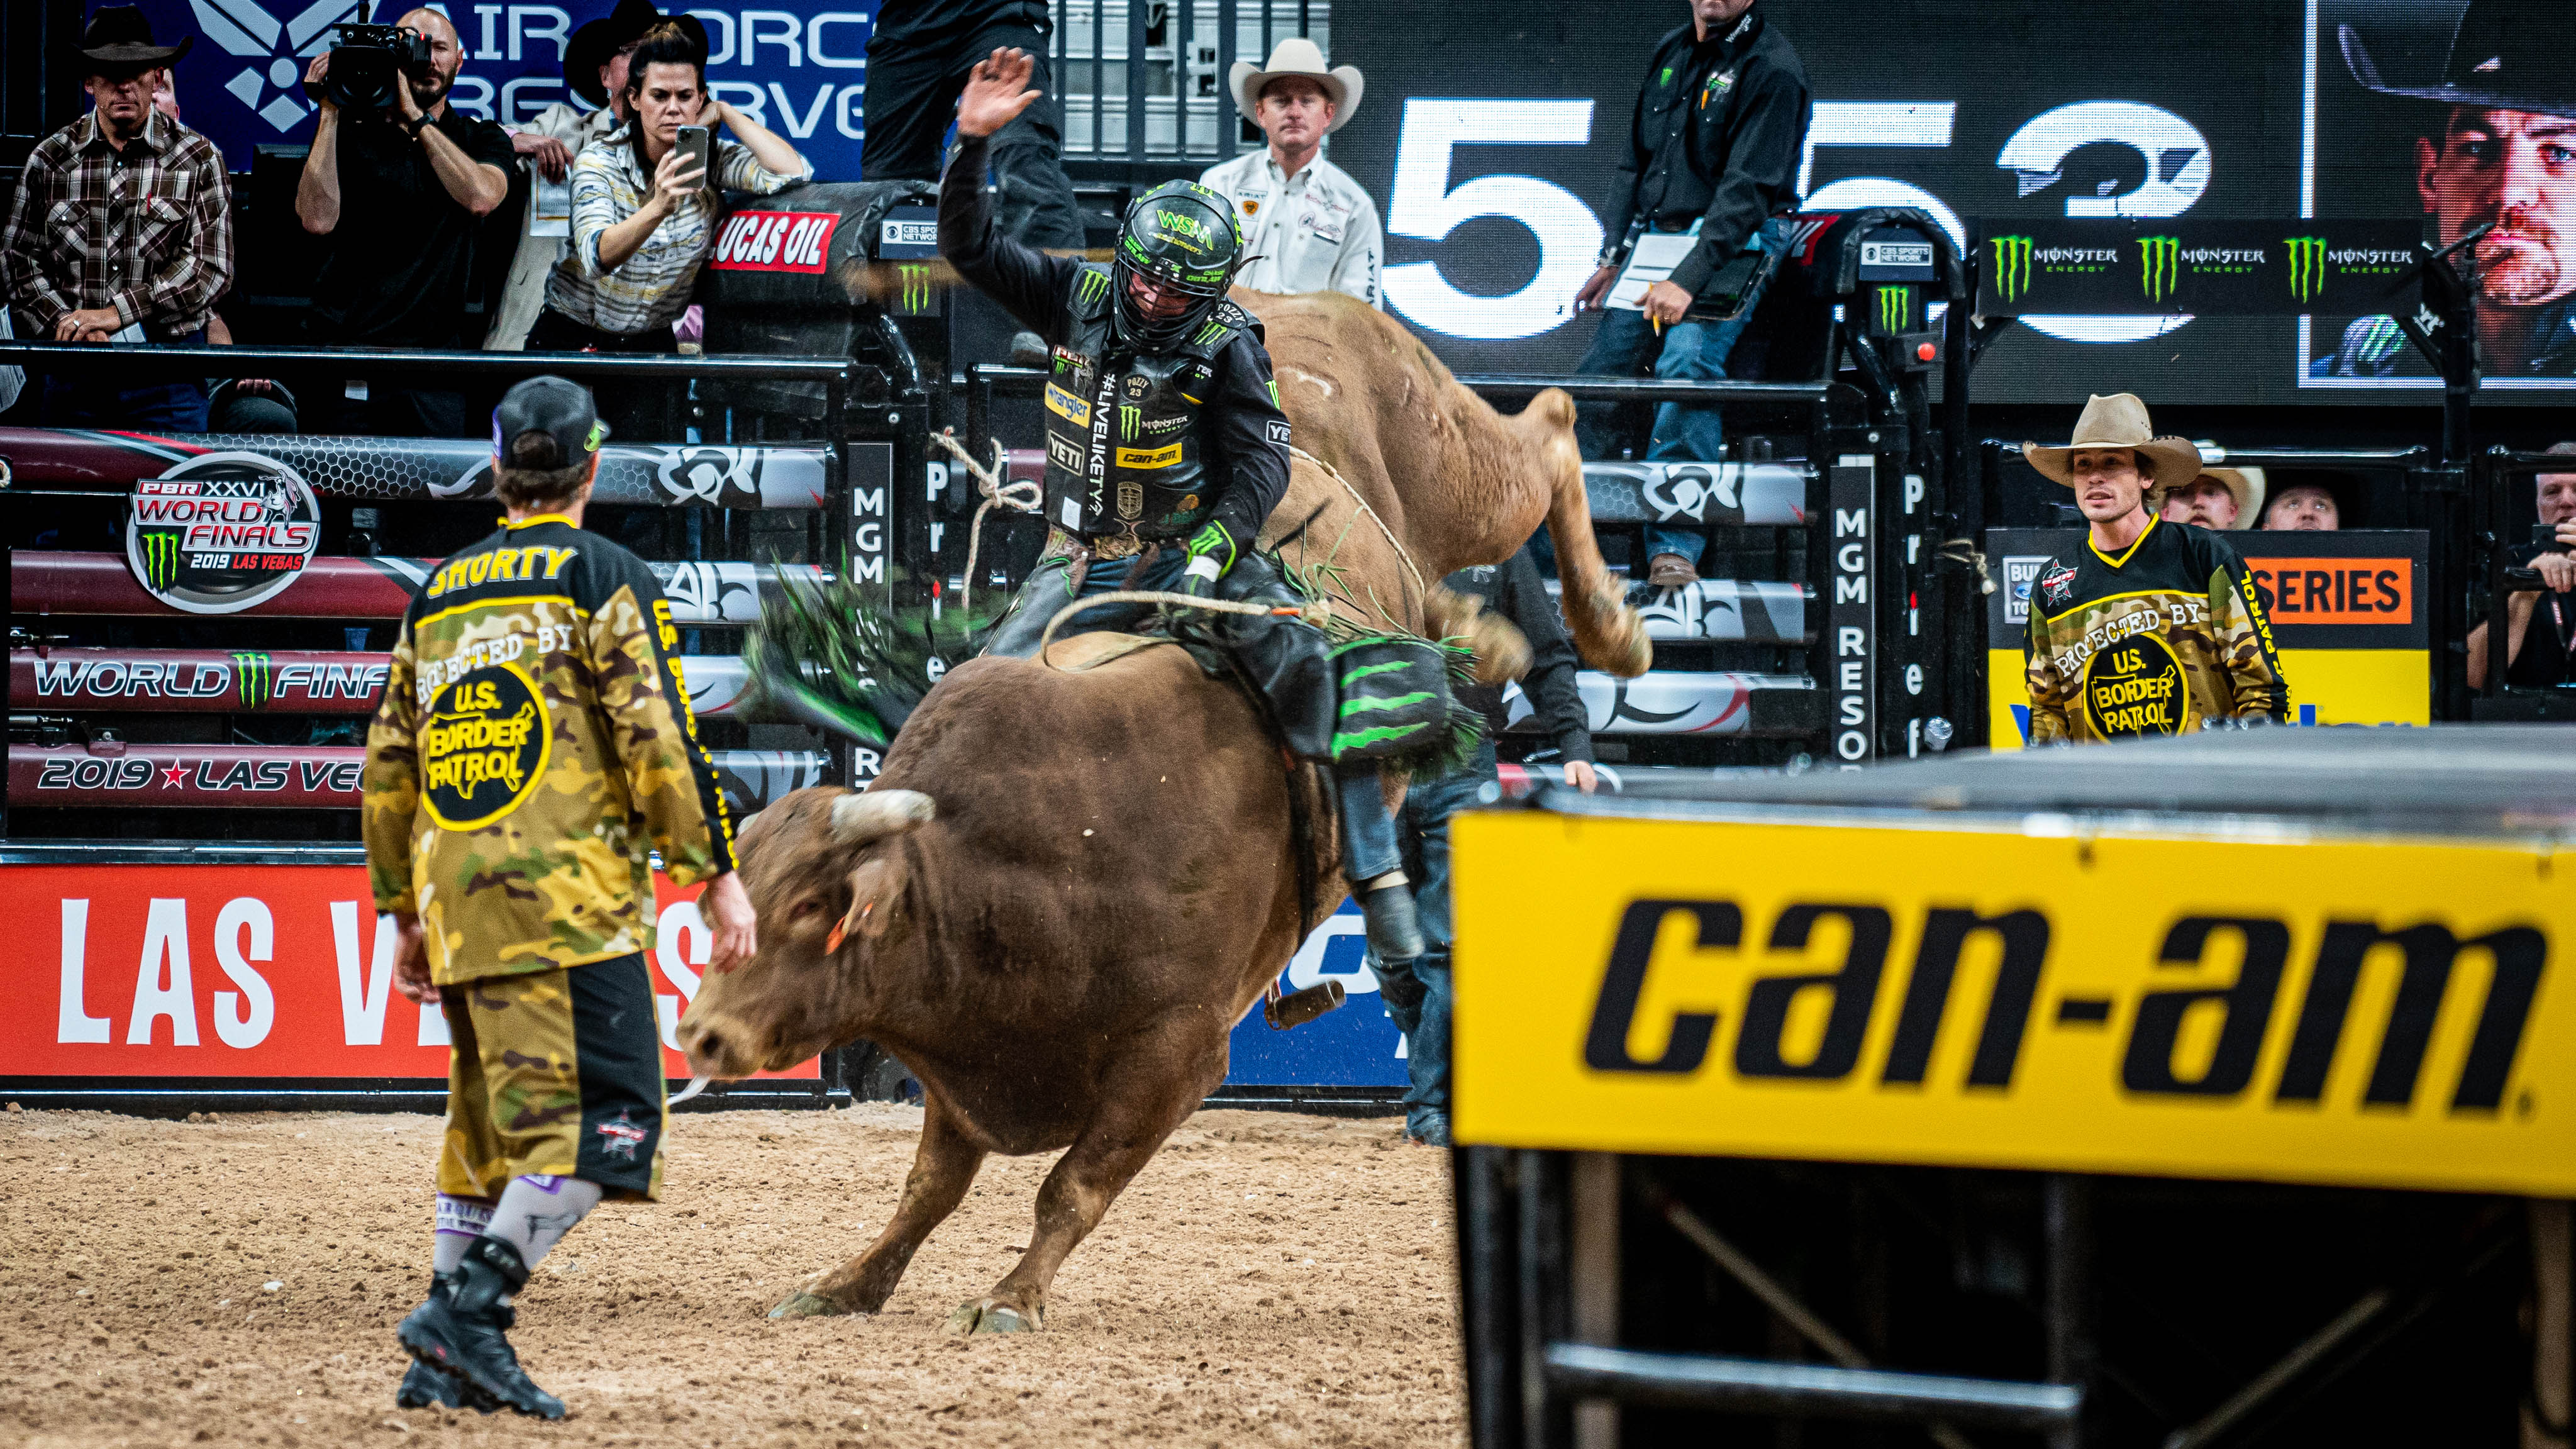 Chase Outlaw riding at a PBR Event 